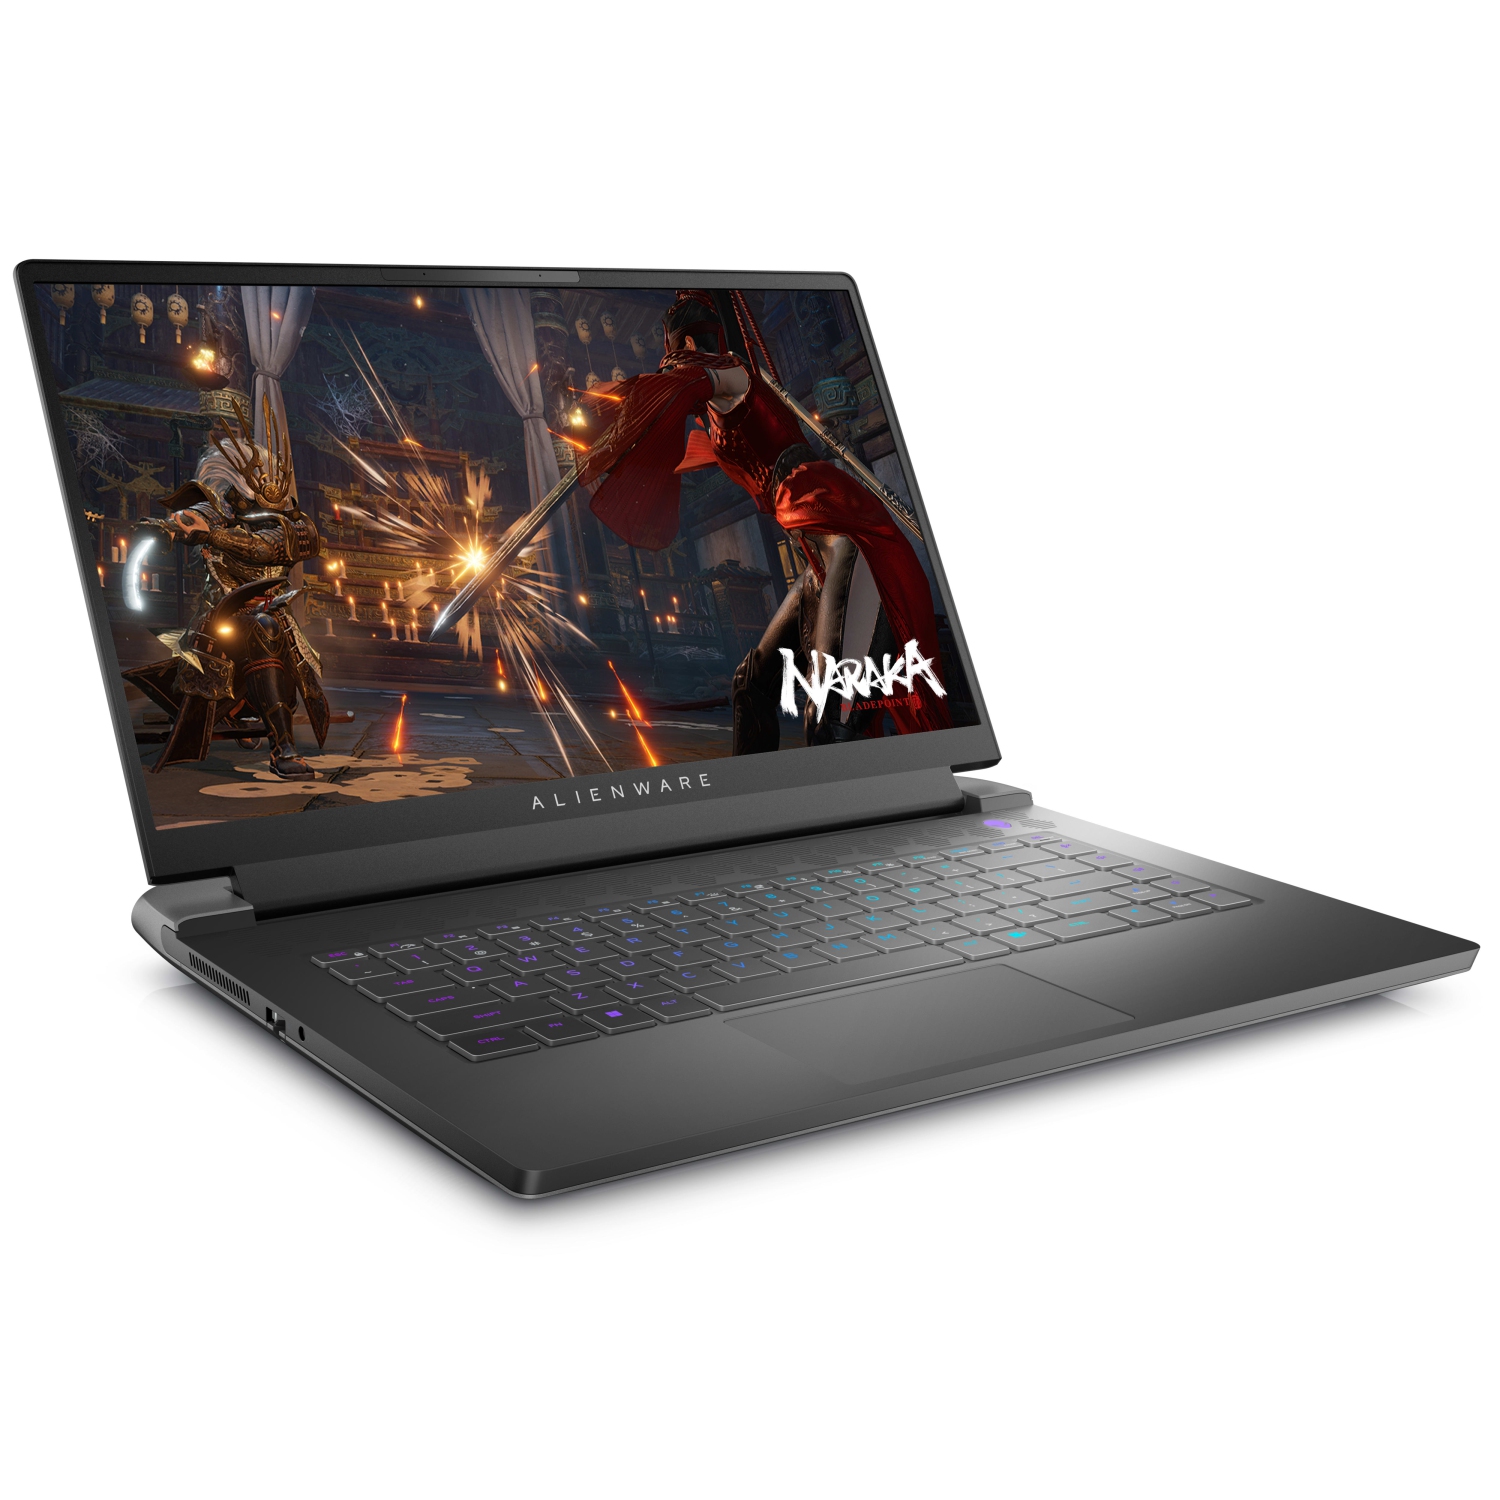 Refurbished (Excellent) – Dell Alienware m15 R7 Gaming Laptop (2022) | 15.6" QHD | Core i9 - 2TB SSD - 32GB RAM - RTX 3080 | 14 Cores @ 5 GHz - 12th Gen CPU - 8GB GDDR6X